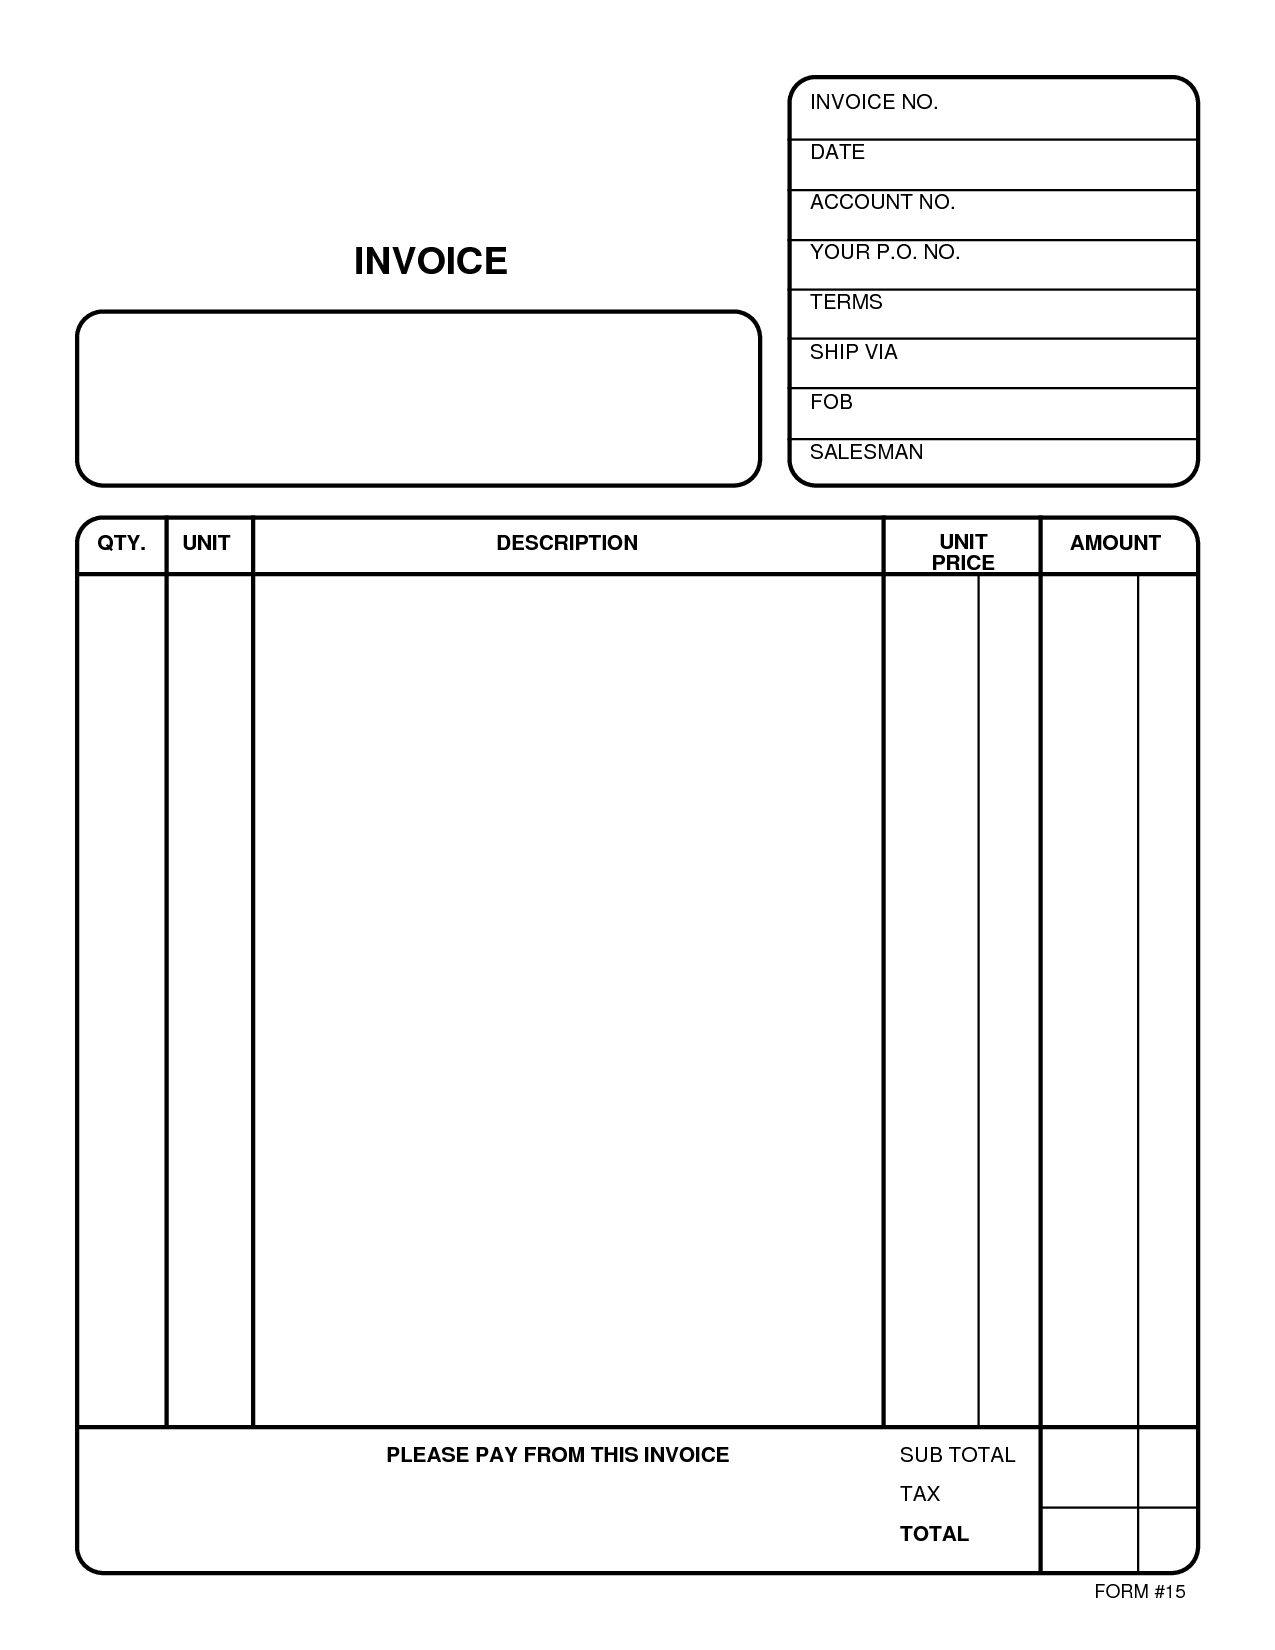 download invoice form online diazepam para caes free online invoices templates